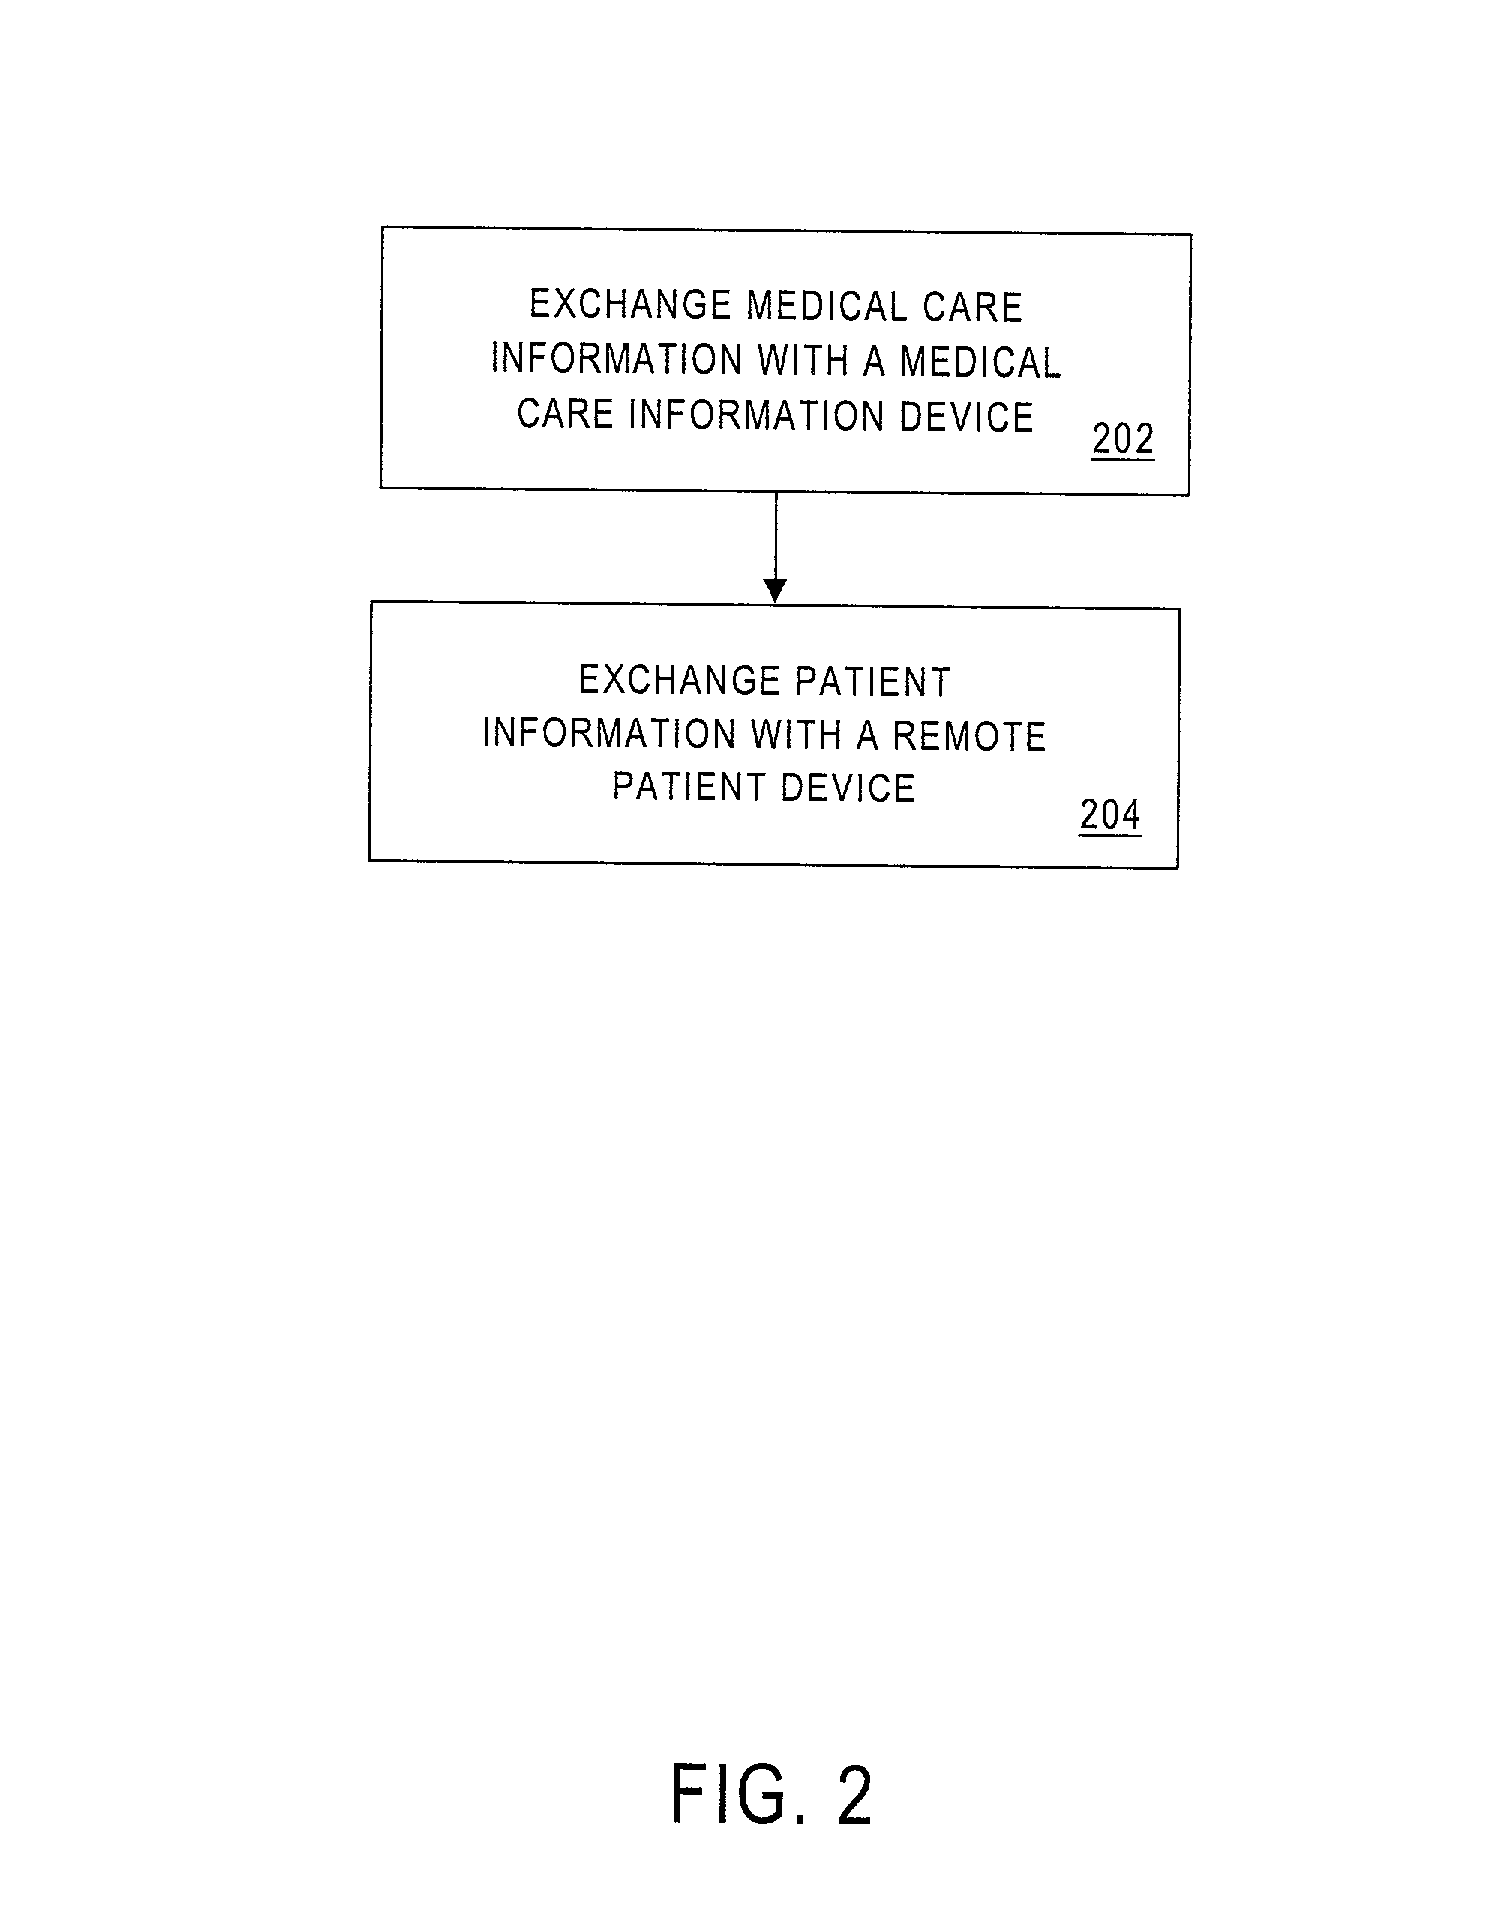 Systems and methods to facilitate an exchange of information associated with medical care provided to a patient